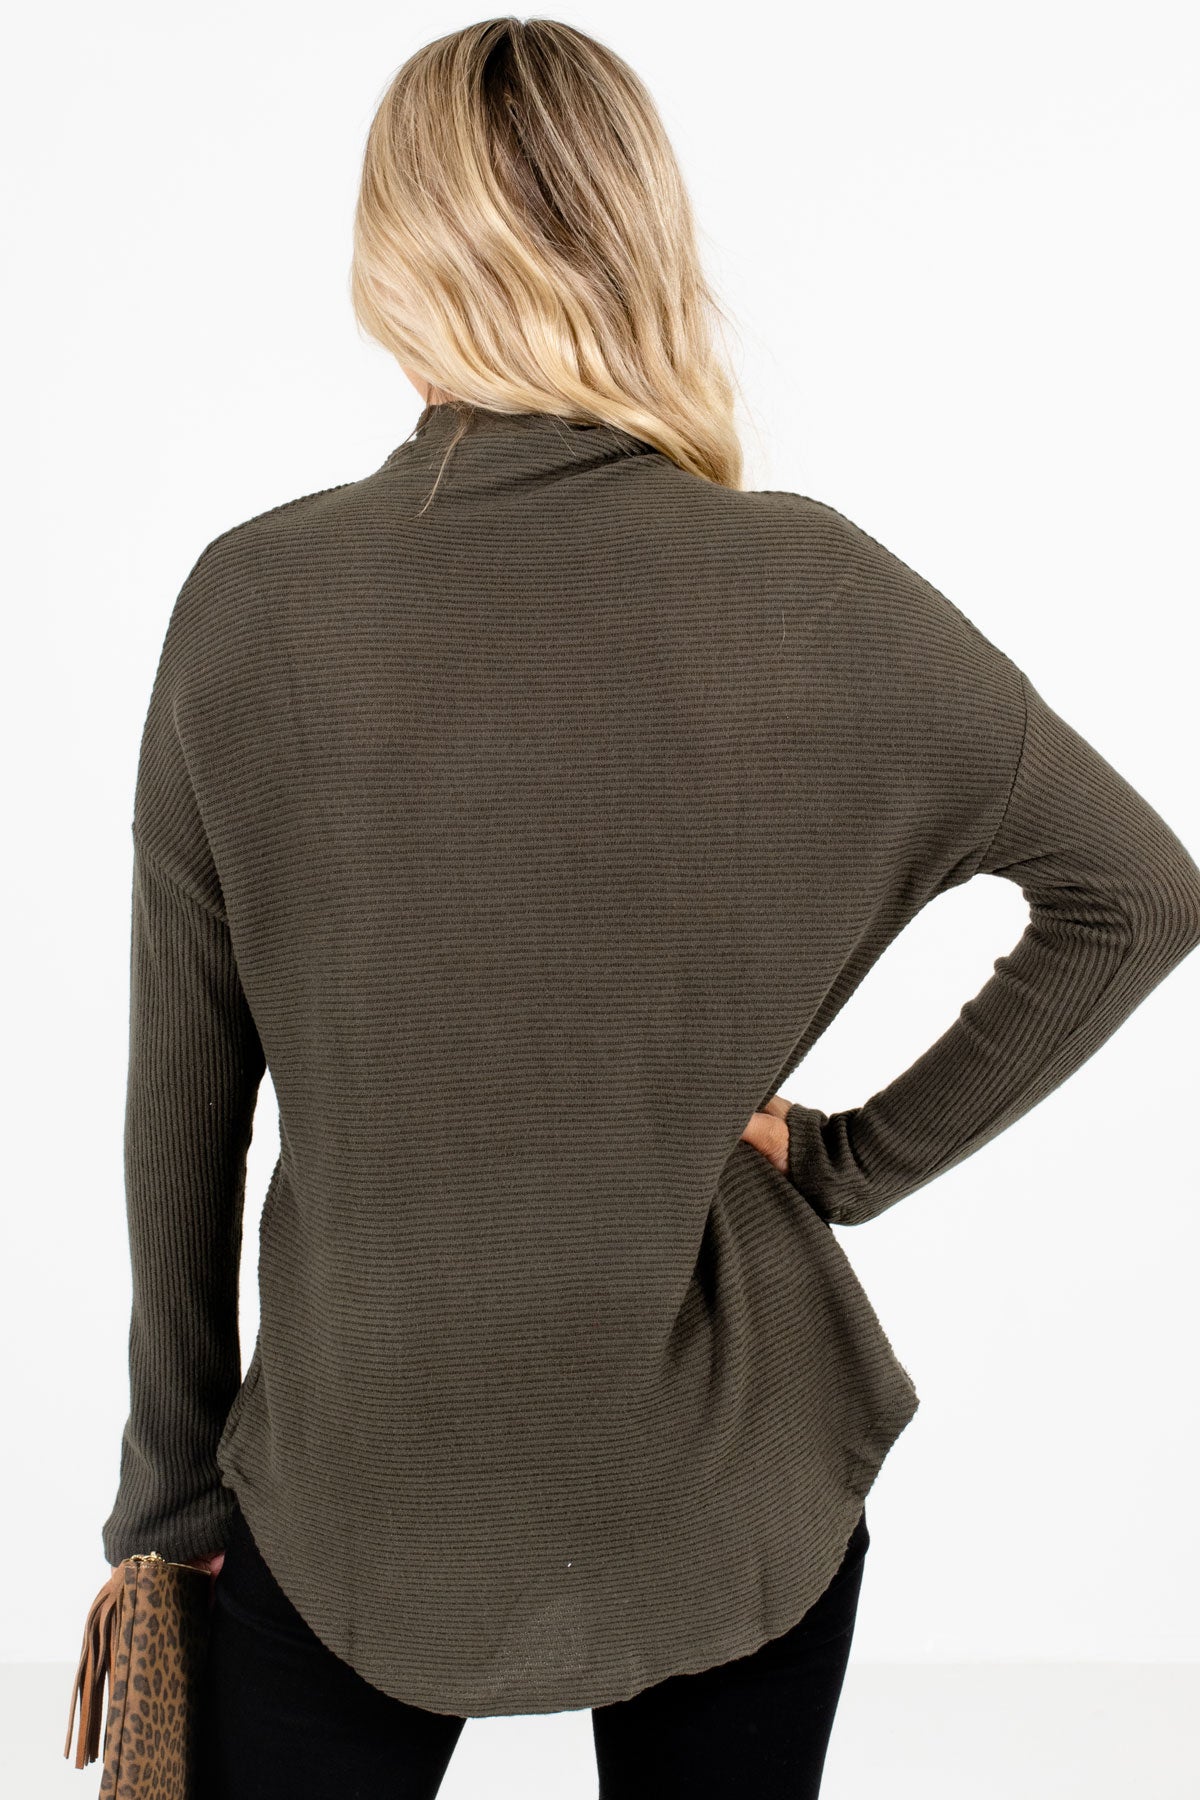 Women’s Olive Green Long Sleeve Boutique Sweater